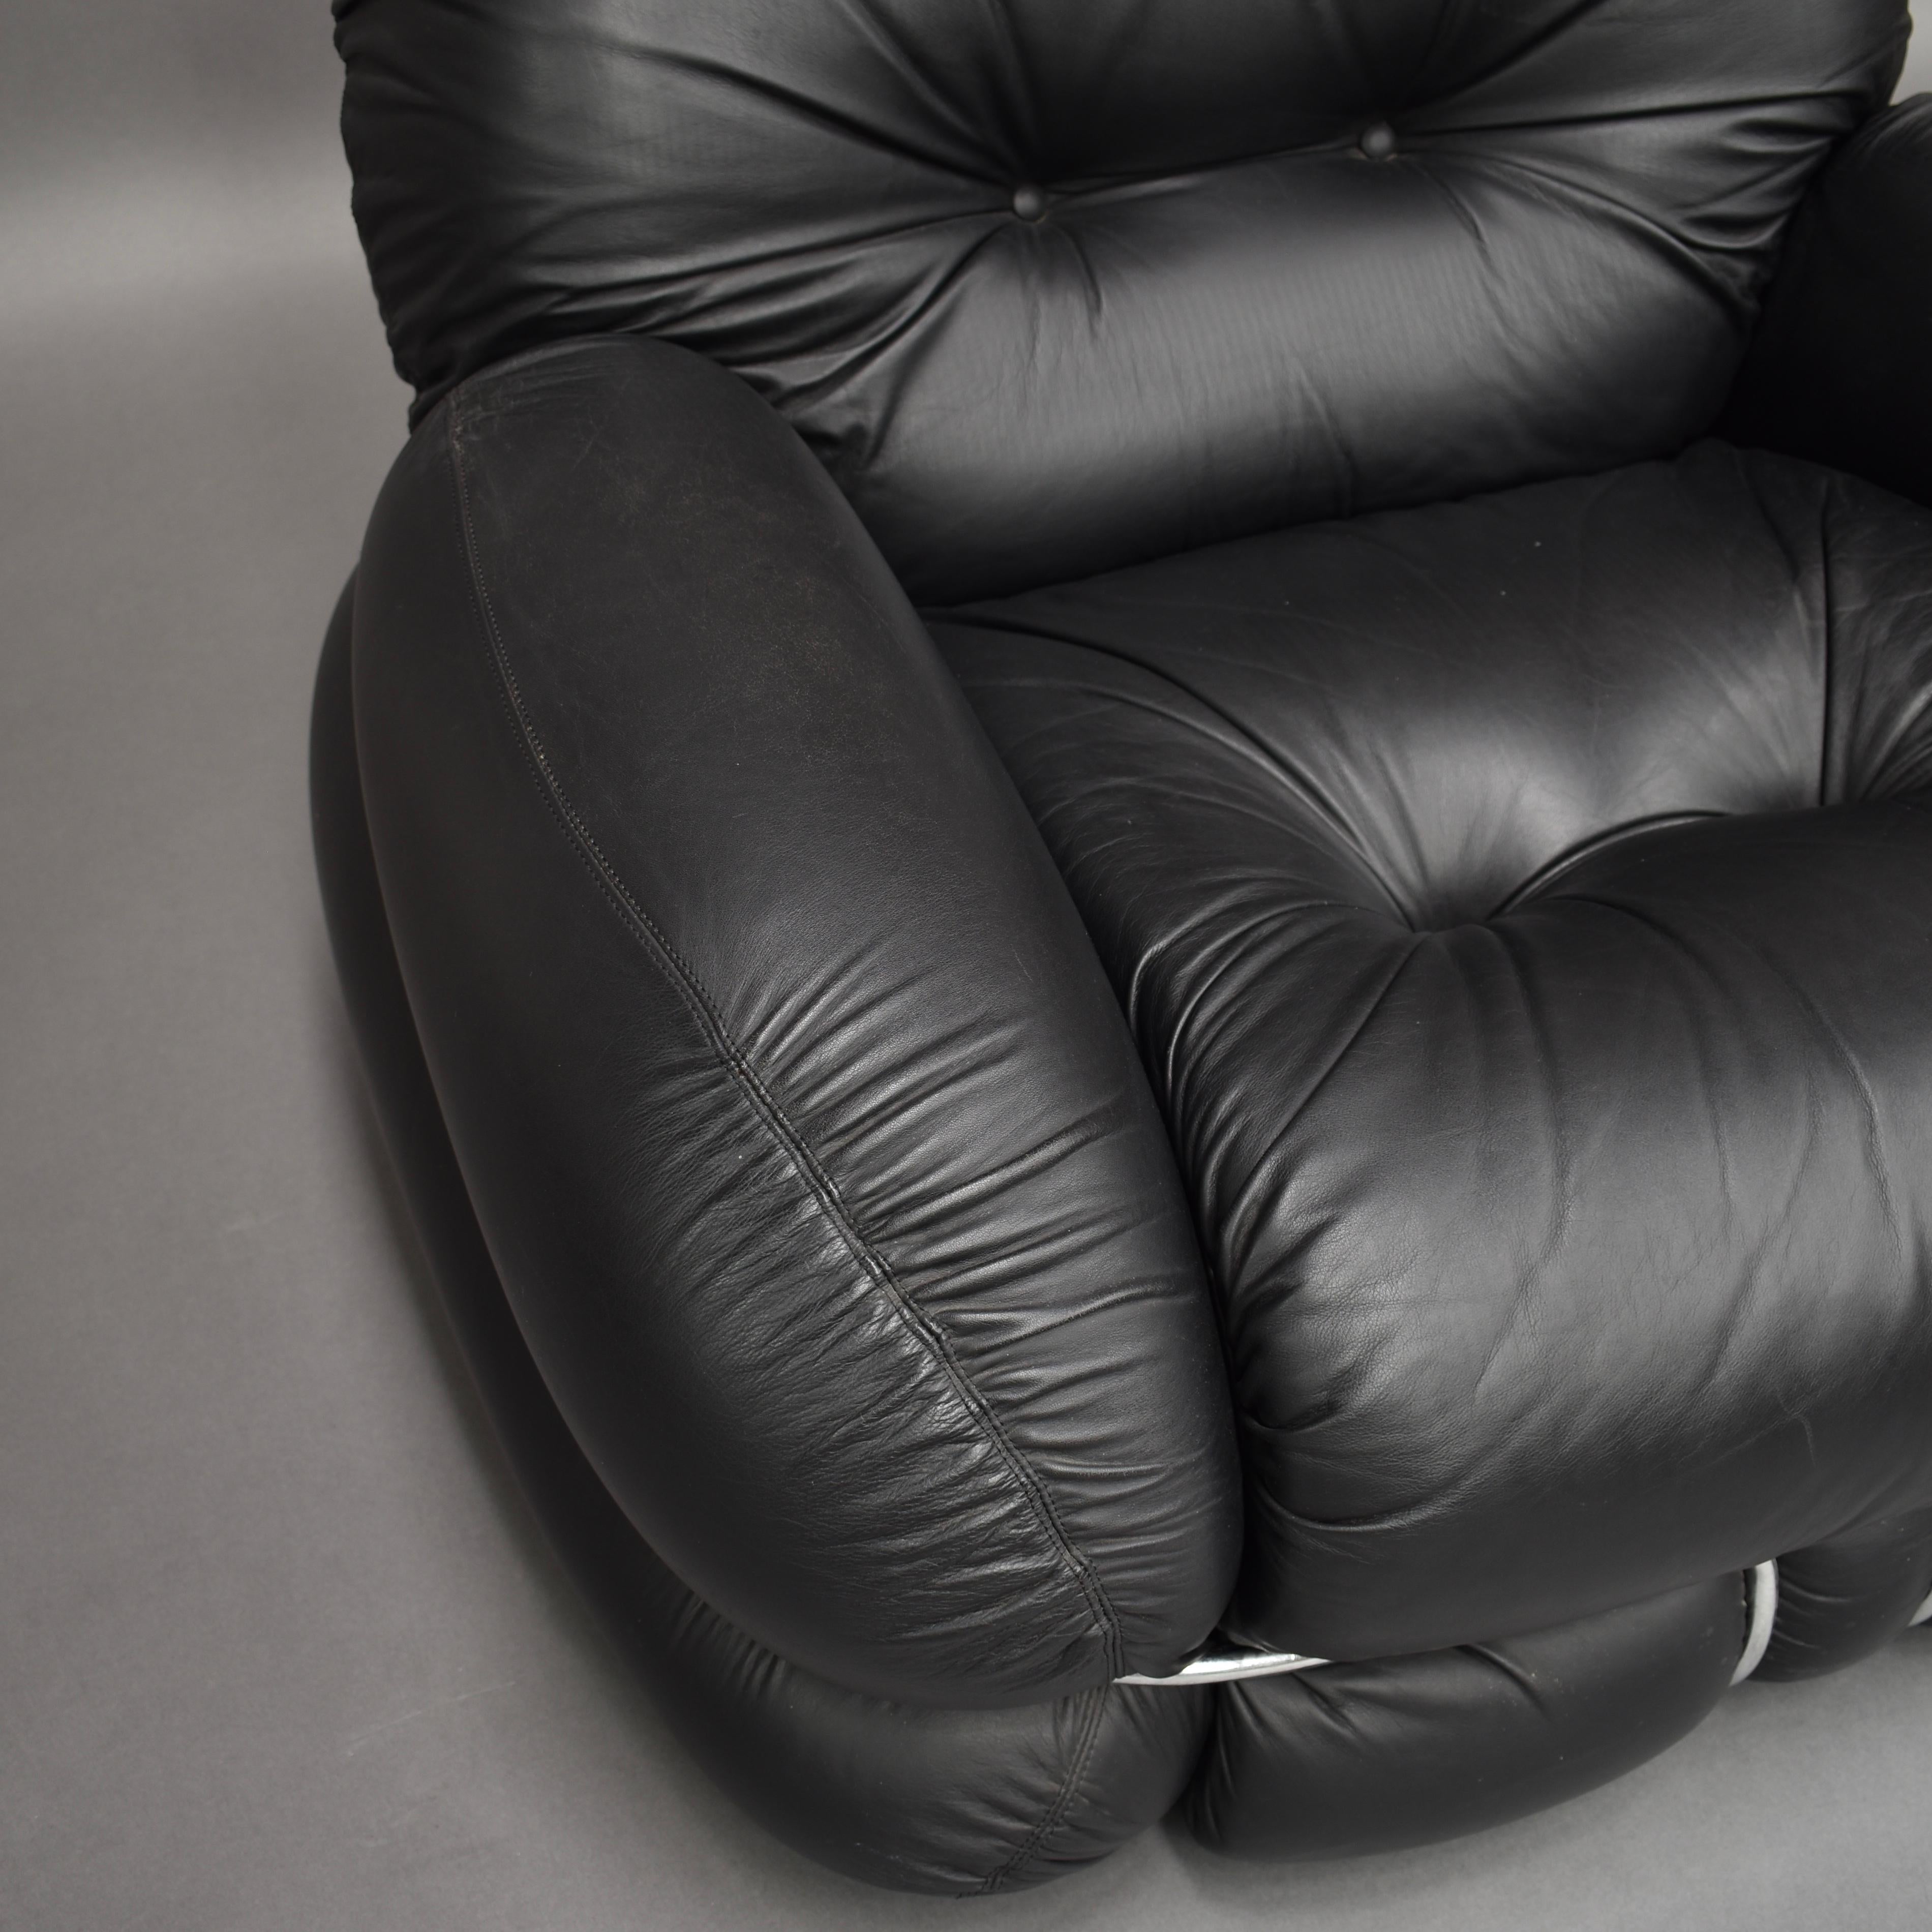 Adriano Piazzesi Black Leather Lounge Chair, Italy, circa 1970 4